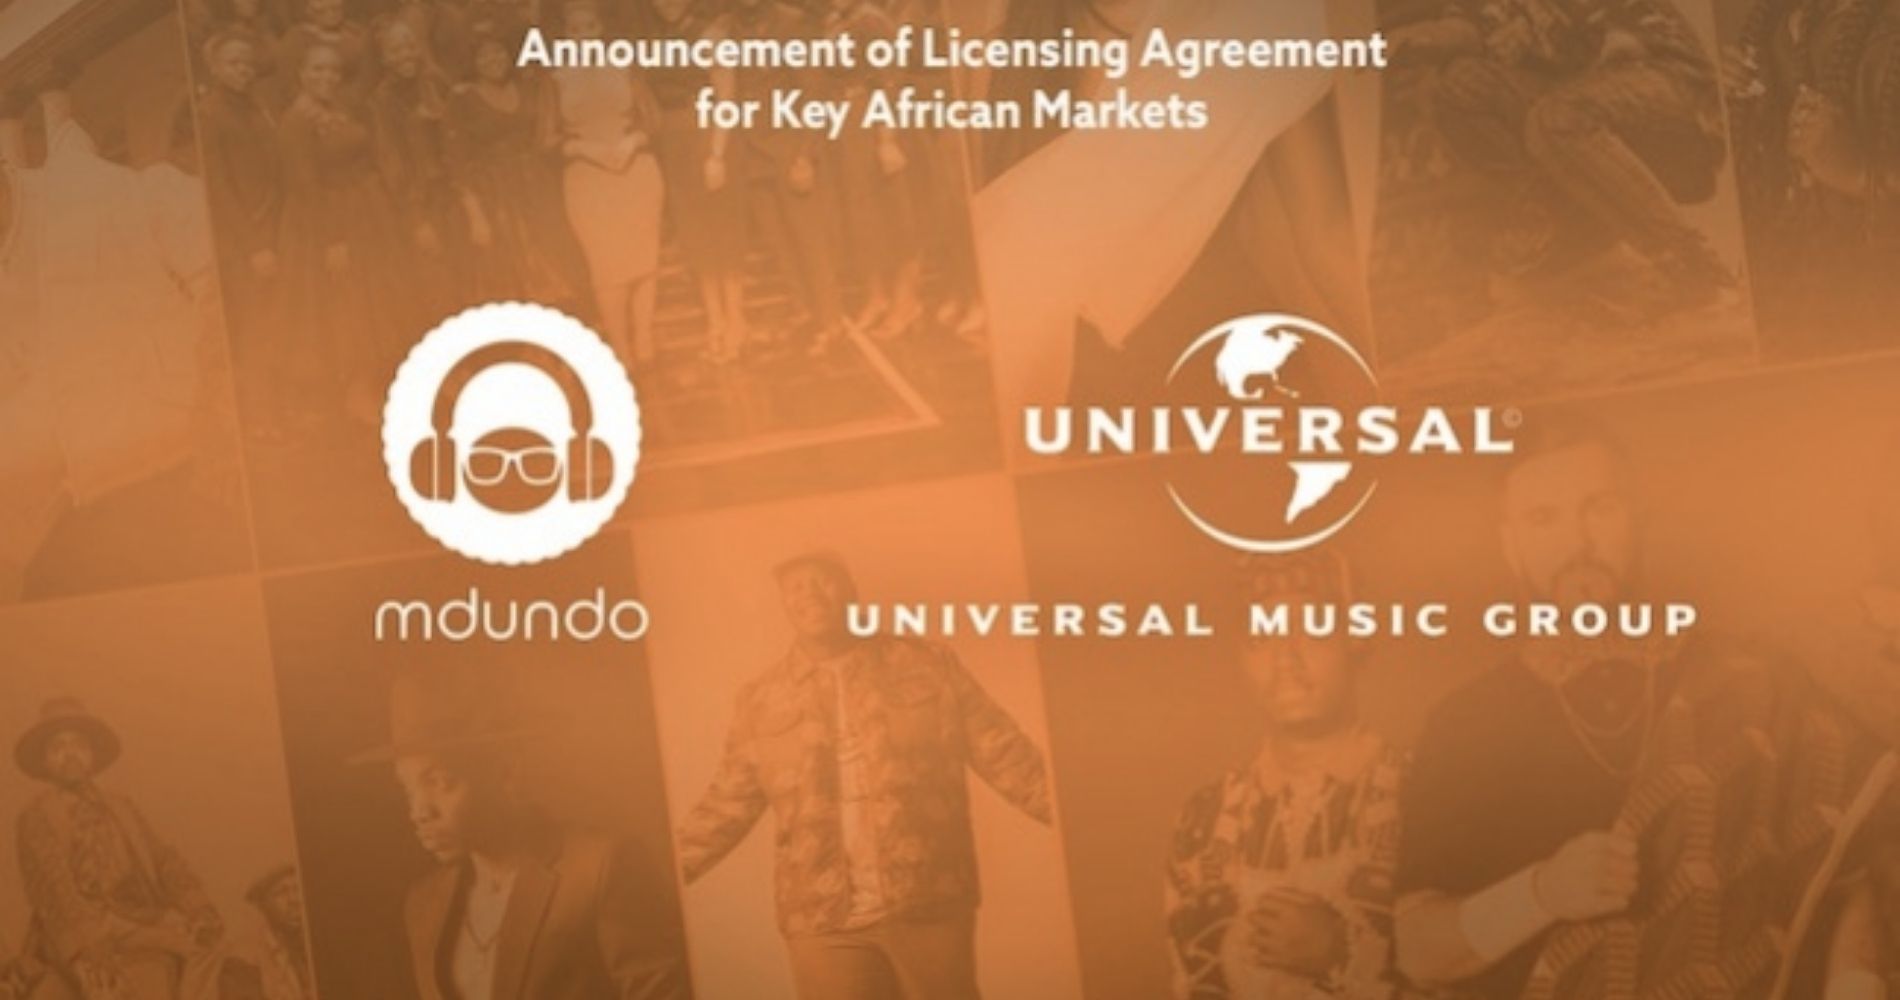 UMG signs licensing deal with music service Mdundo for key